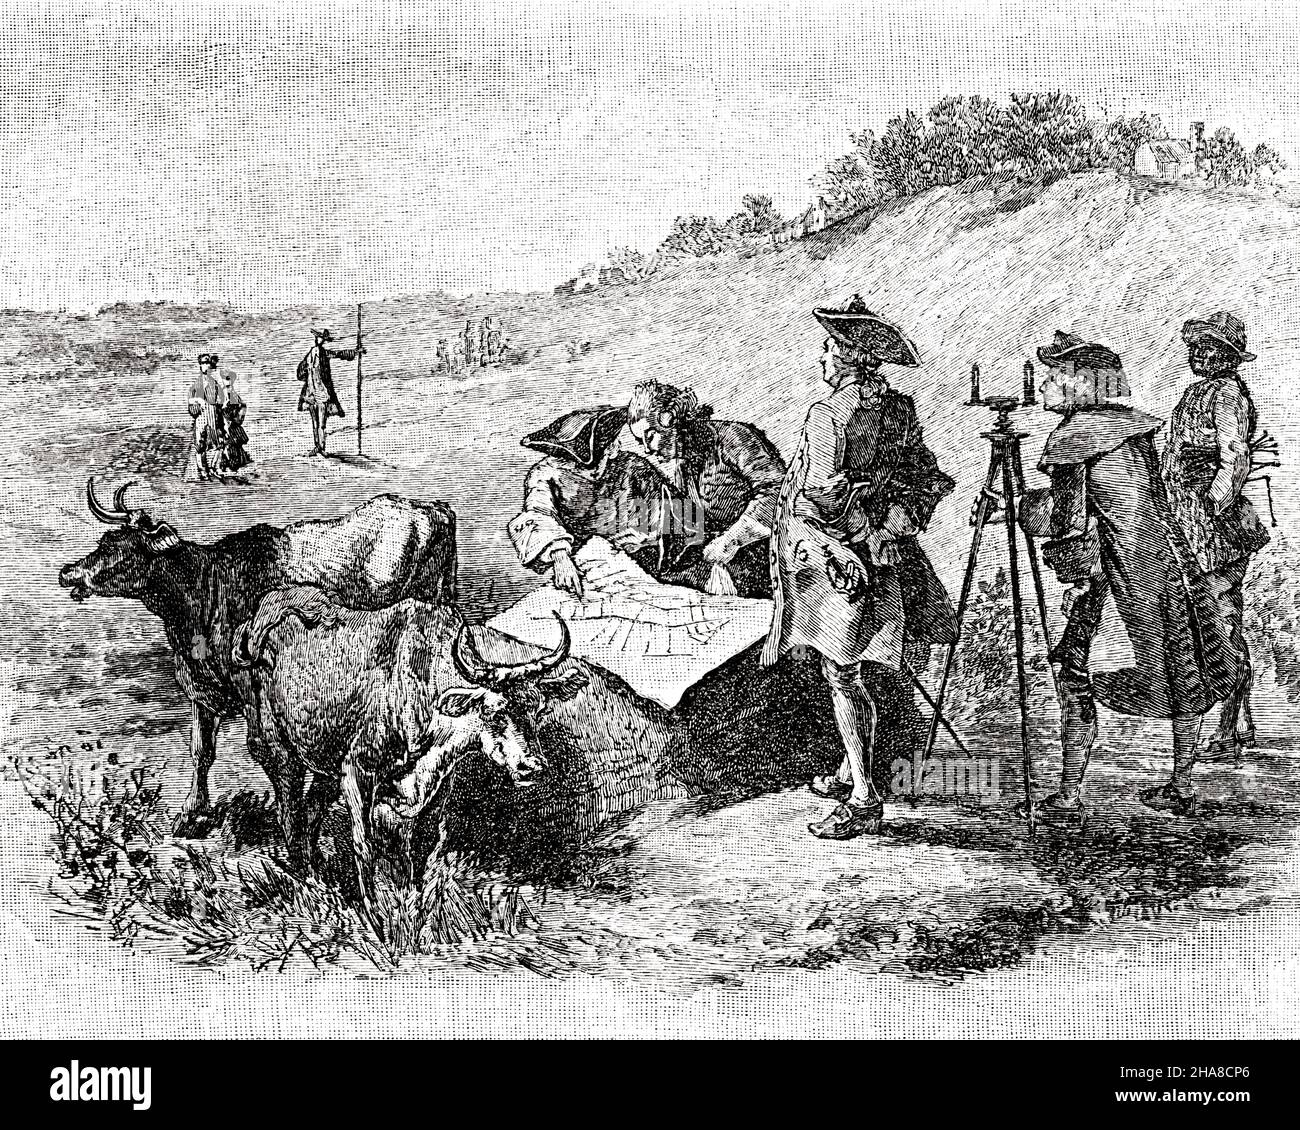 1700s JANUARY 12 1730 SURVEYORS WITH MAP AND MEASURING TOOLS AMID OXEN IN FIELD LAYING OUT BALTIMORE MARYLAND COLONIAL AMERICA - o3423 LAN001 HARS MALES PLANNING B&W FREEDOM GOALS CATTLE VISION SKILL OCCUPATION LAYING SKILLS ADVENTURE MD BALTIMORE AND TRICORN COLONY INNOVATION OPPORTUNITY AUTHORITY OCCUPATIONS OXEN HIGH TECH SURVEYING SIGHTING LEVELING SURVEYORS AMERICAS COOPERATION GROWTH PRECISION TRANSIT 1700s BLACK AND WHITE OLD FASHIONED Stock Photo